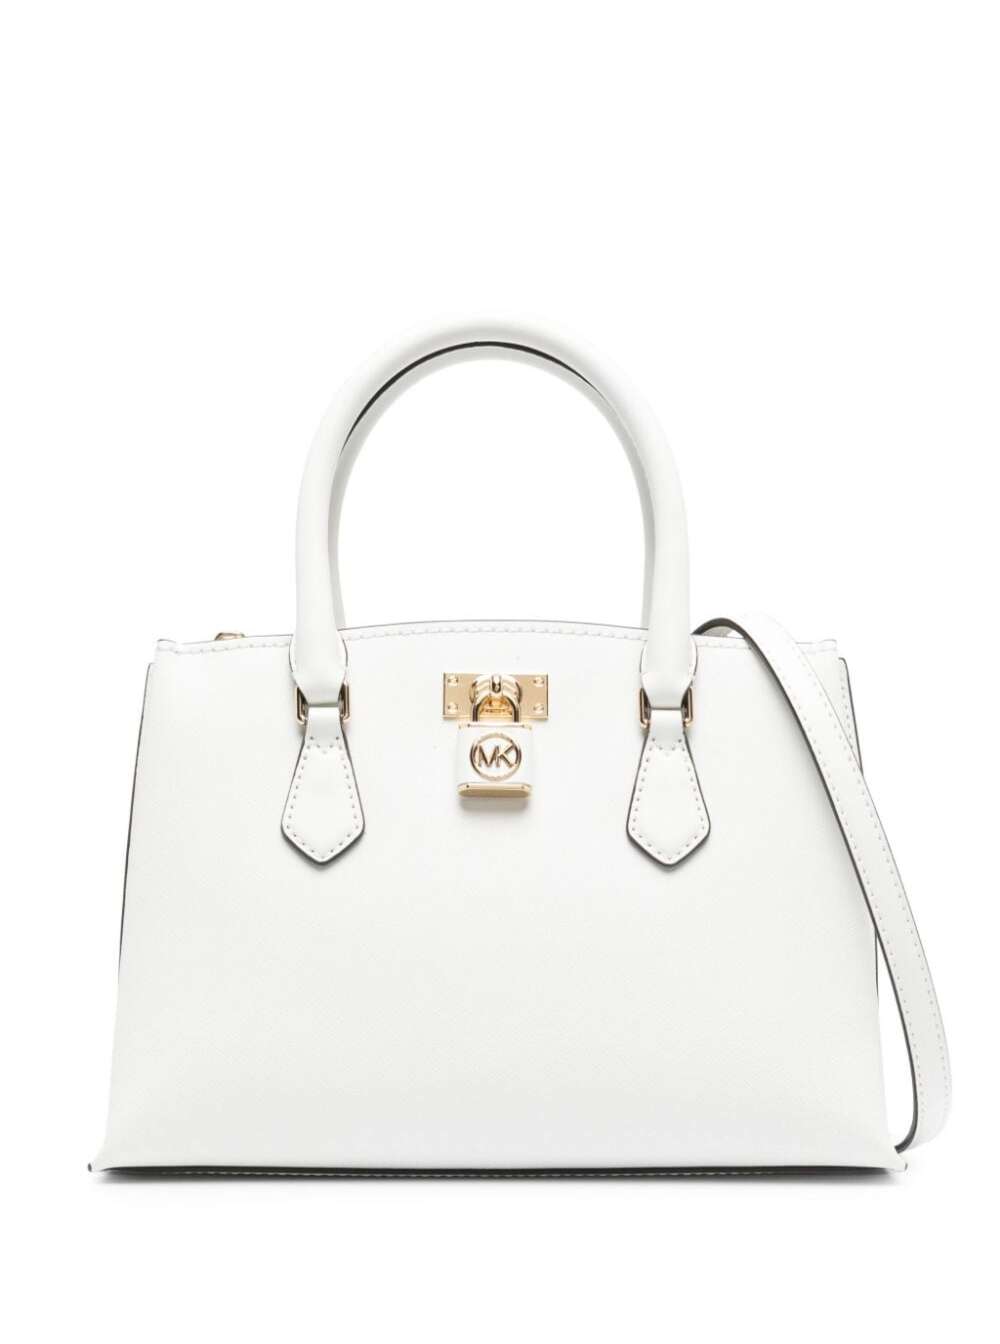 Michael Michael Kors White Ruby Tote Bag With Lock Detailing In Saffiano Leather Woman